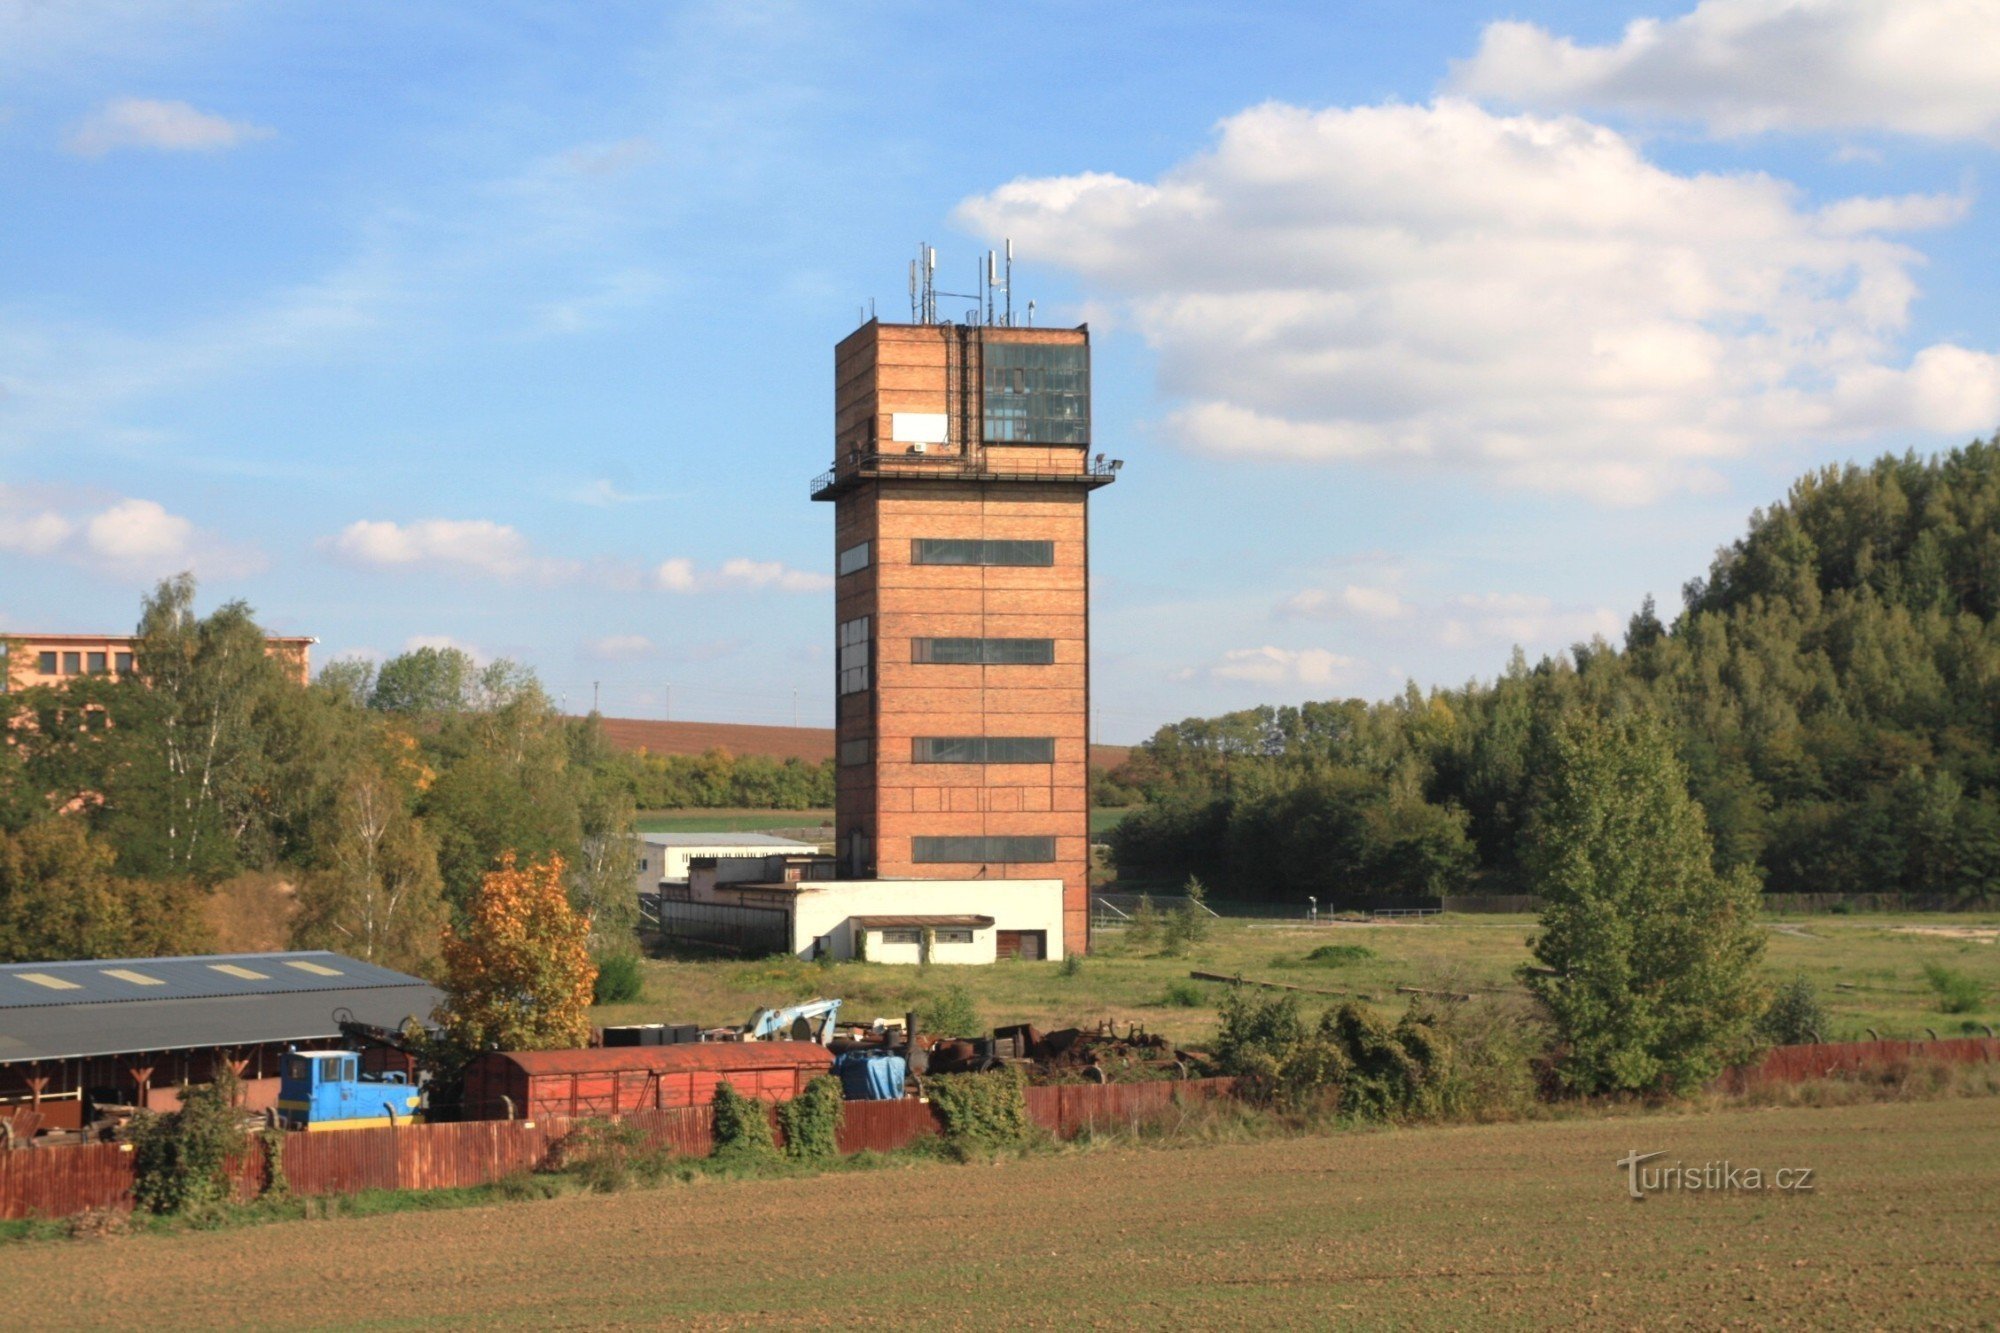 The mining tower of the Jindřich mine